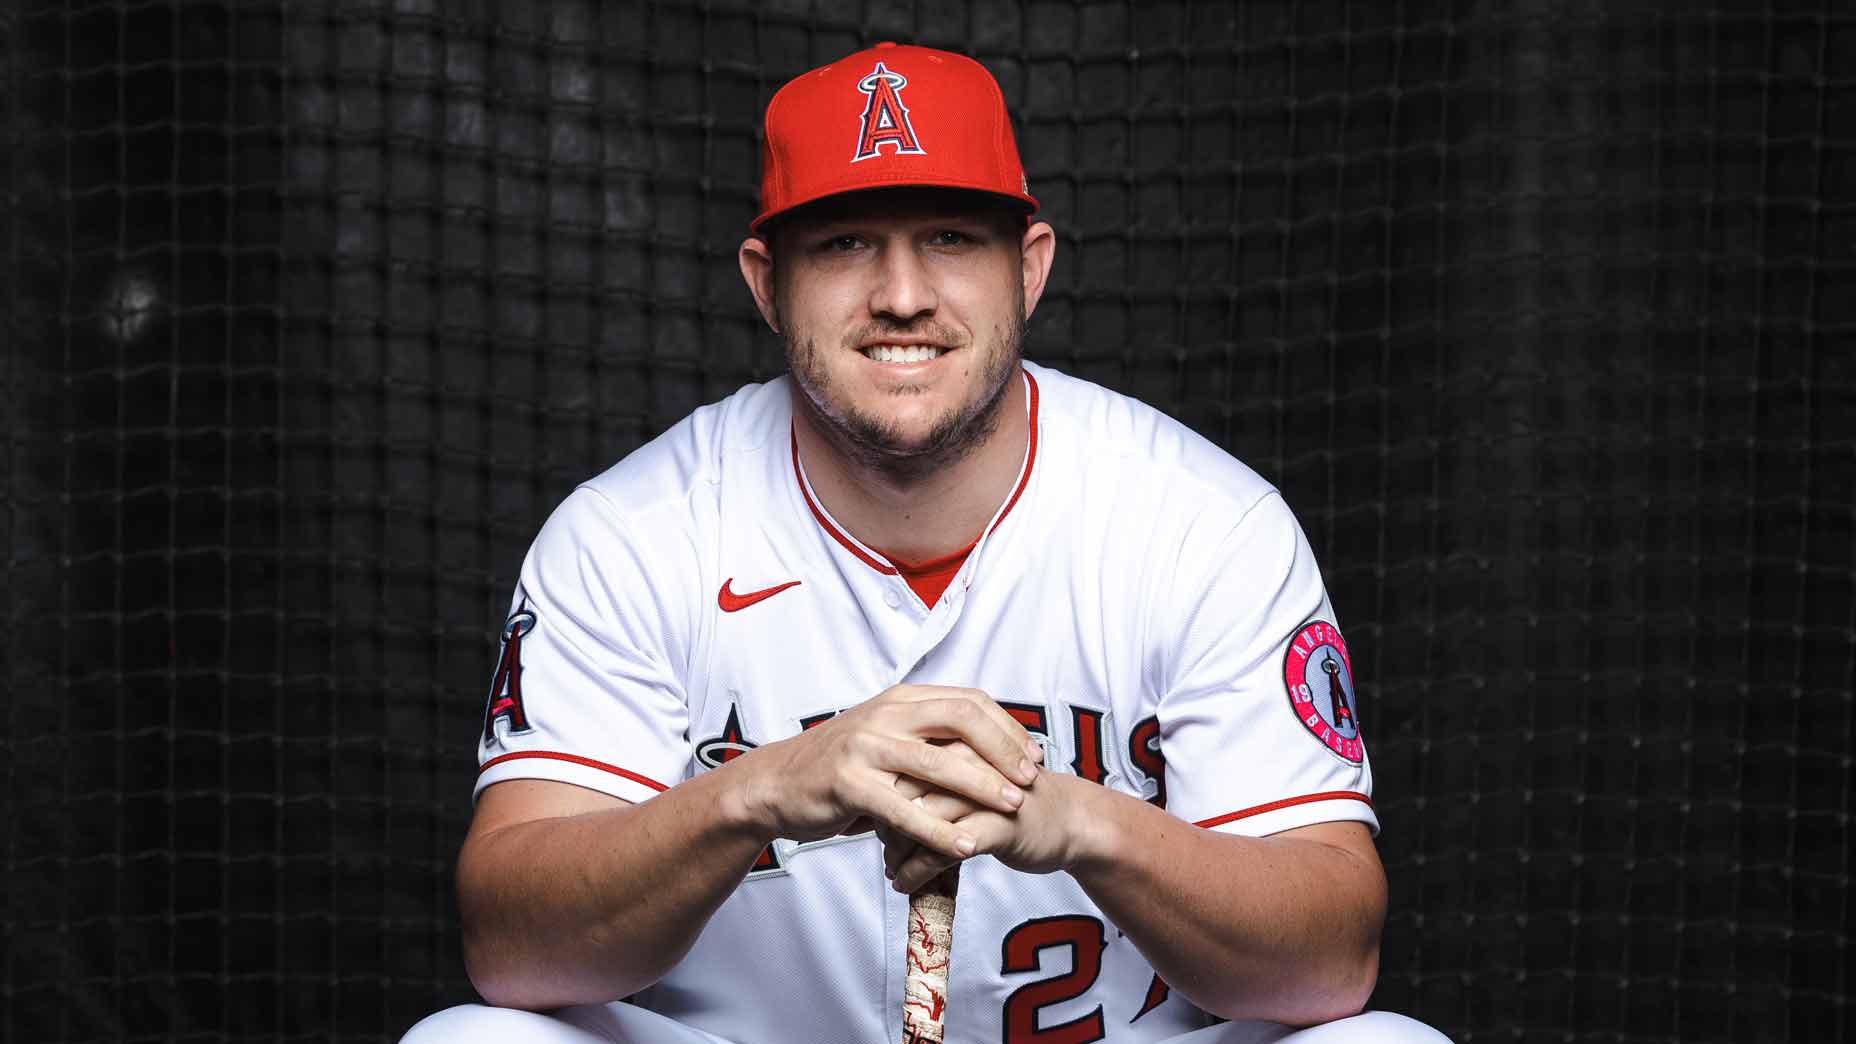 Mike Trout talks belting drives and his viral quarantine trick shot: Q&A